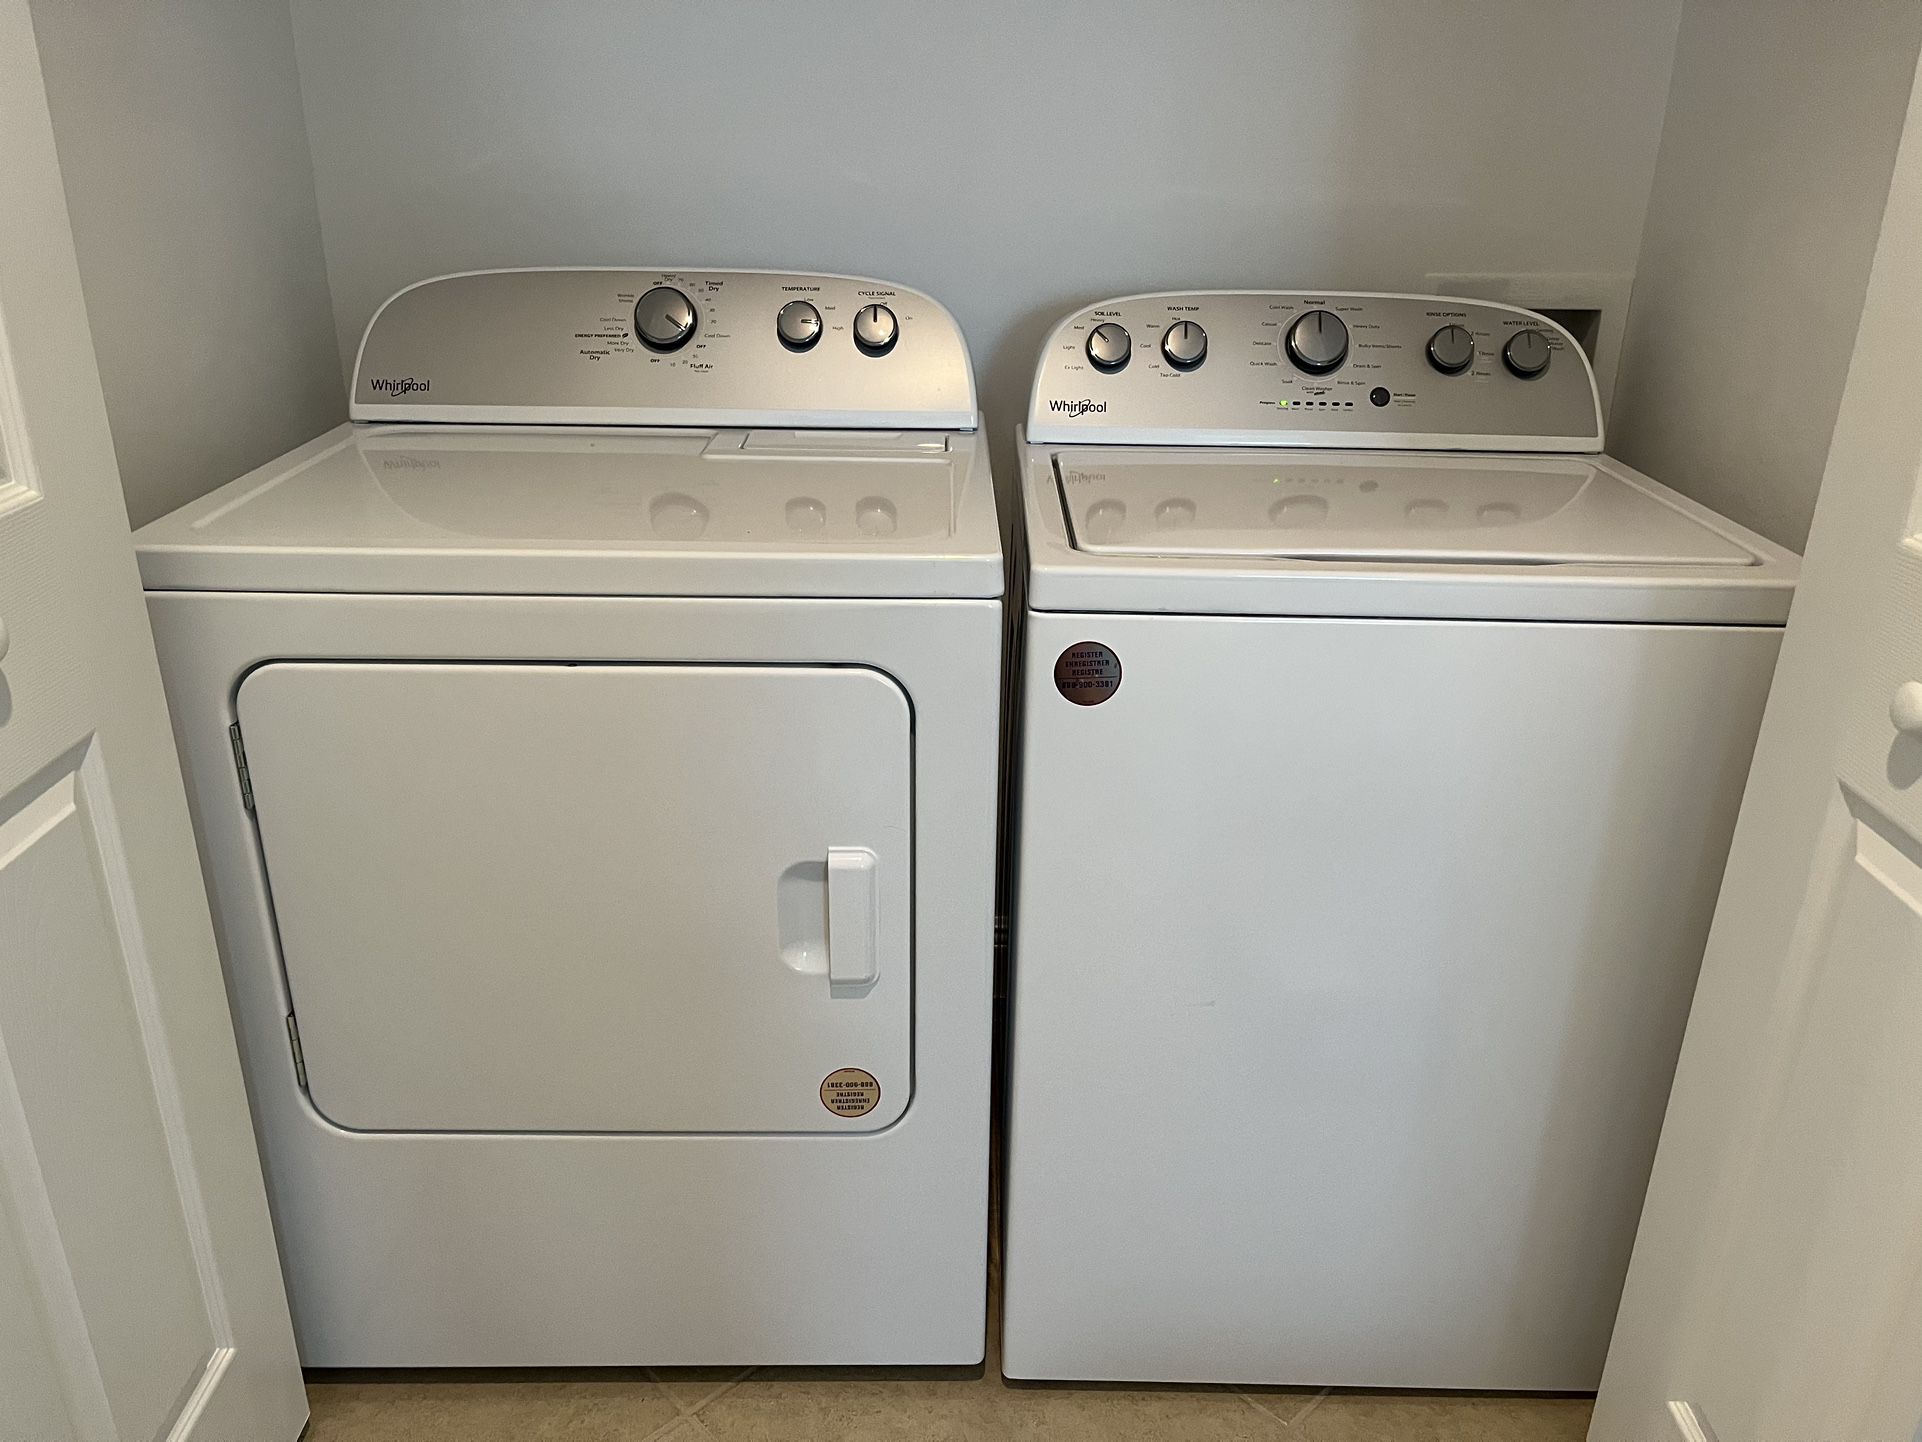 New Whirlpool Washer And Dryer Set 